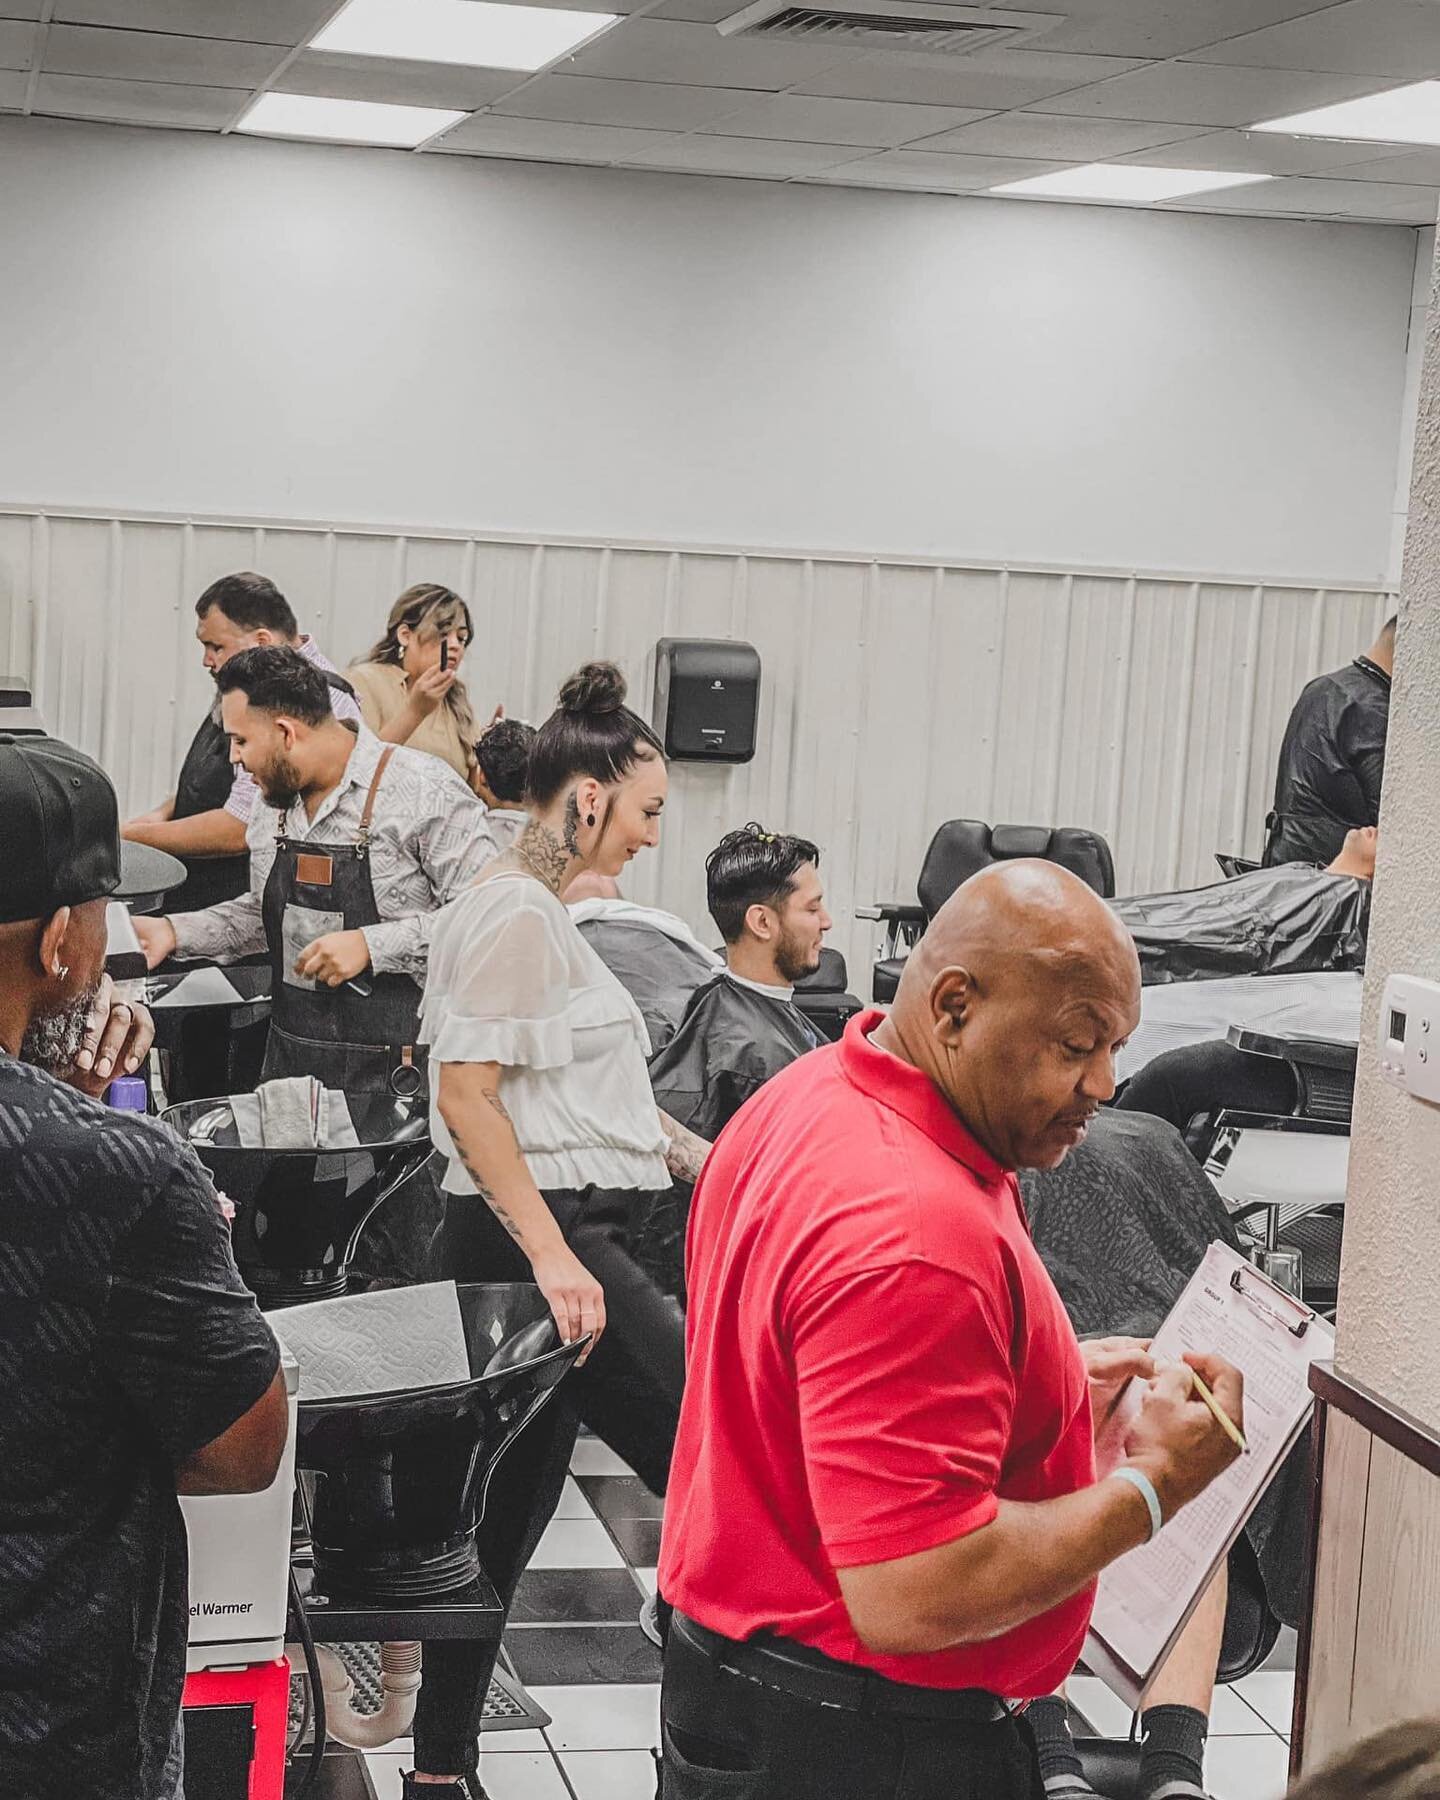 We pride ourselves in guiding our students be the best they can be and fully-prepared for the next step on their barbering journey. 

Here are a few of our students working on their state board exams this past weekend.

Learn more about becoming a ba